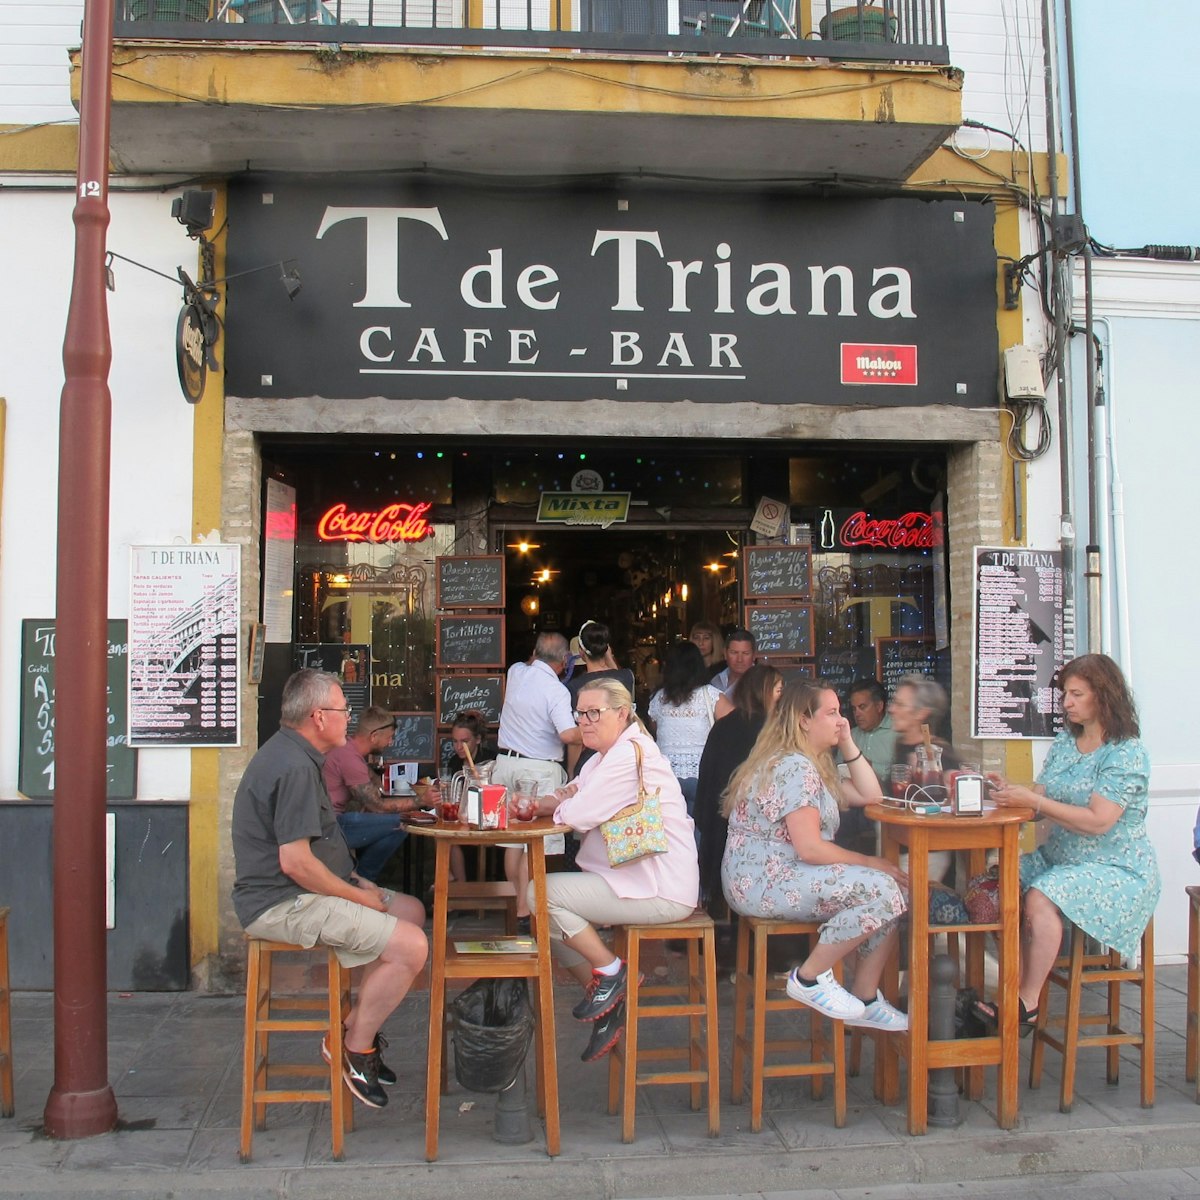 T de Triana cafe bar with people sitting on chairs outside.